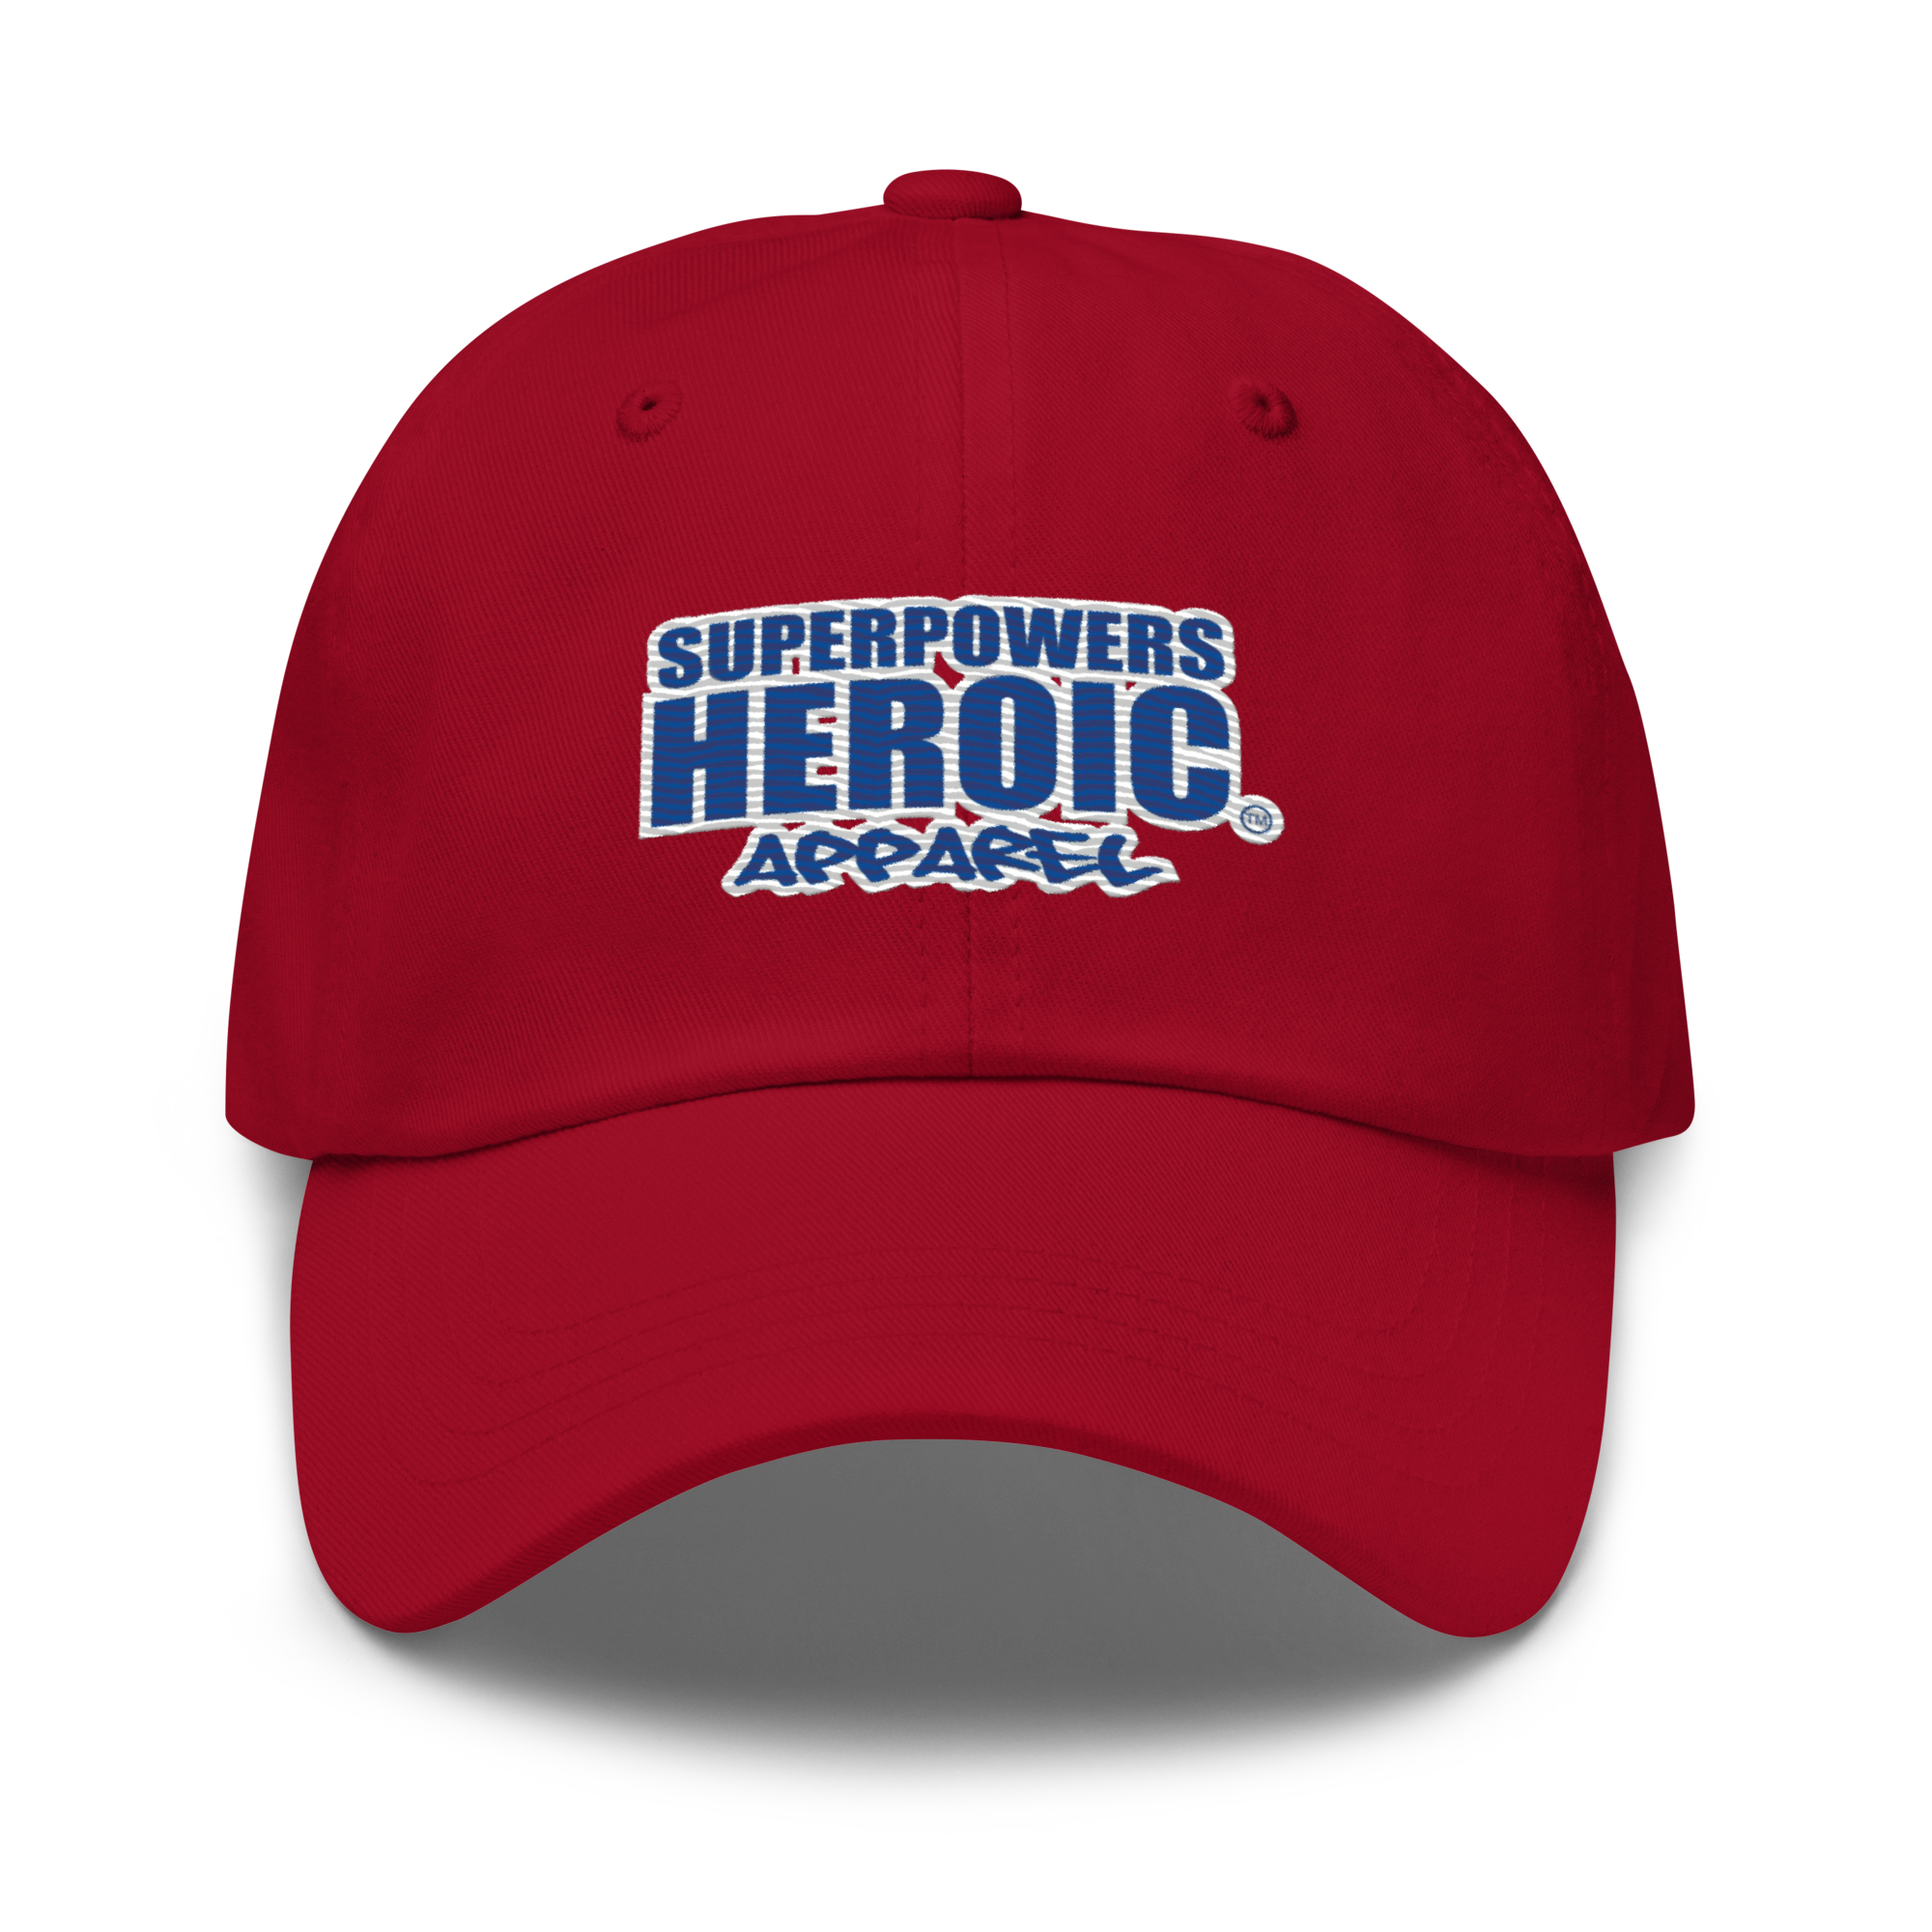 SUPERPOWERS HEROIC APPAREL (A) Dad Hat - SUPERPOWERS HEROIC APPAREL